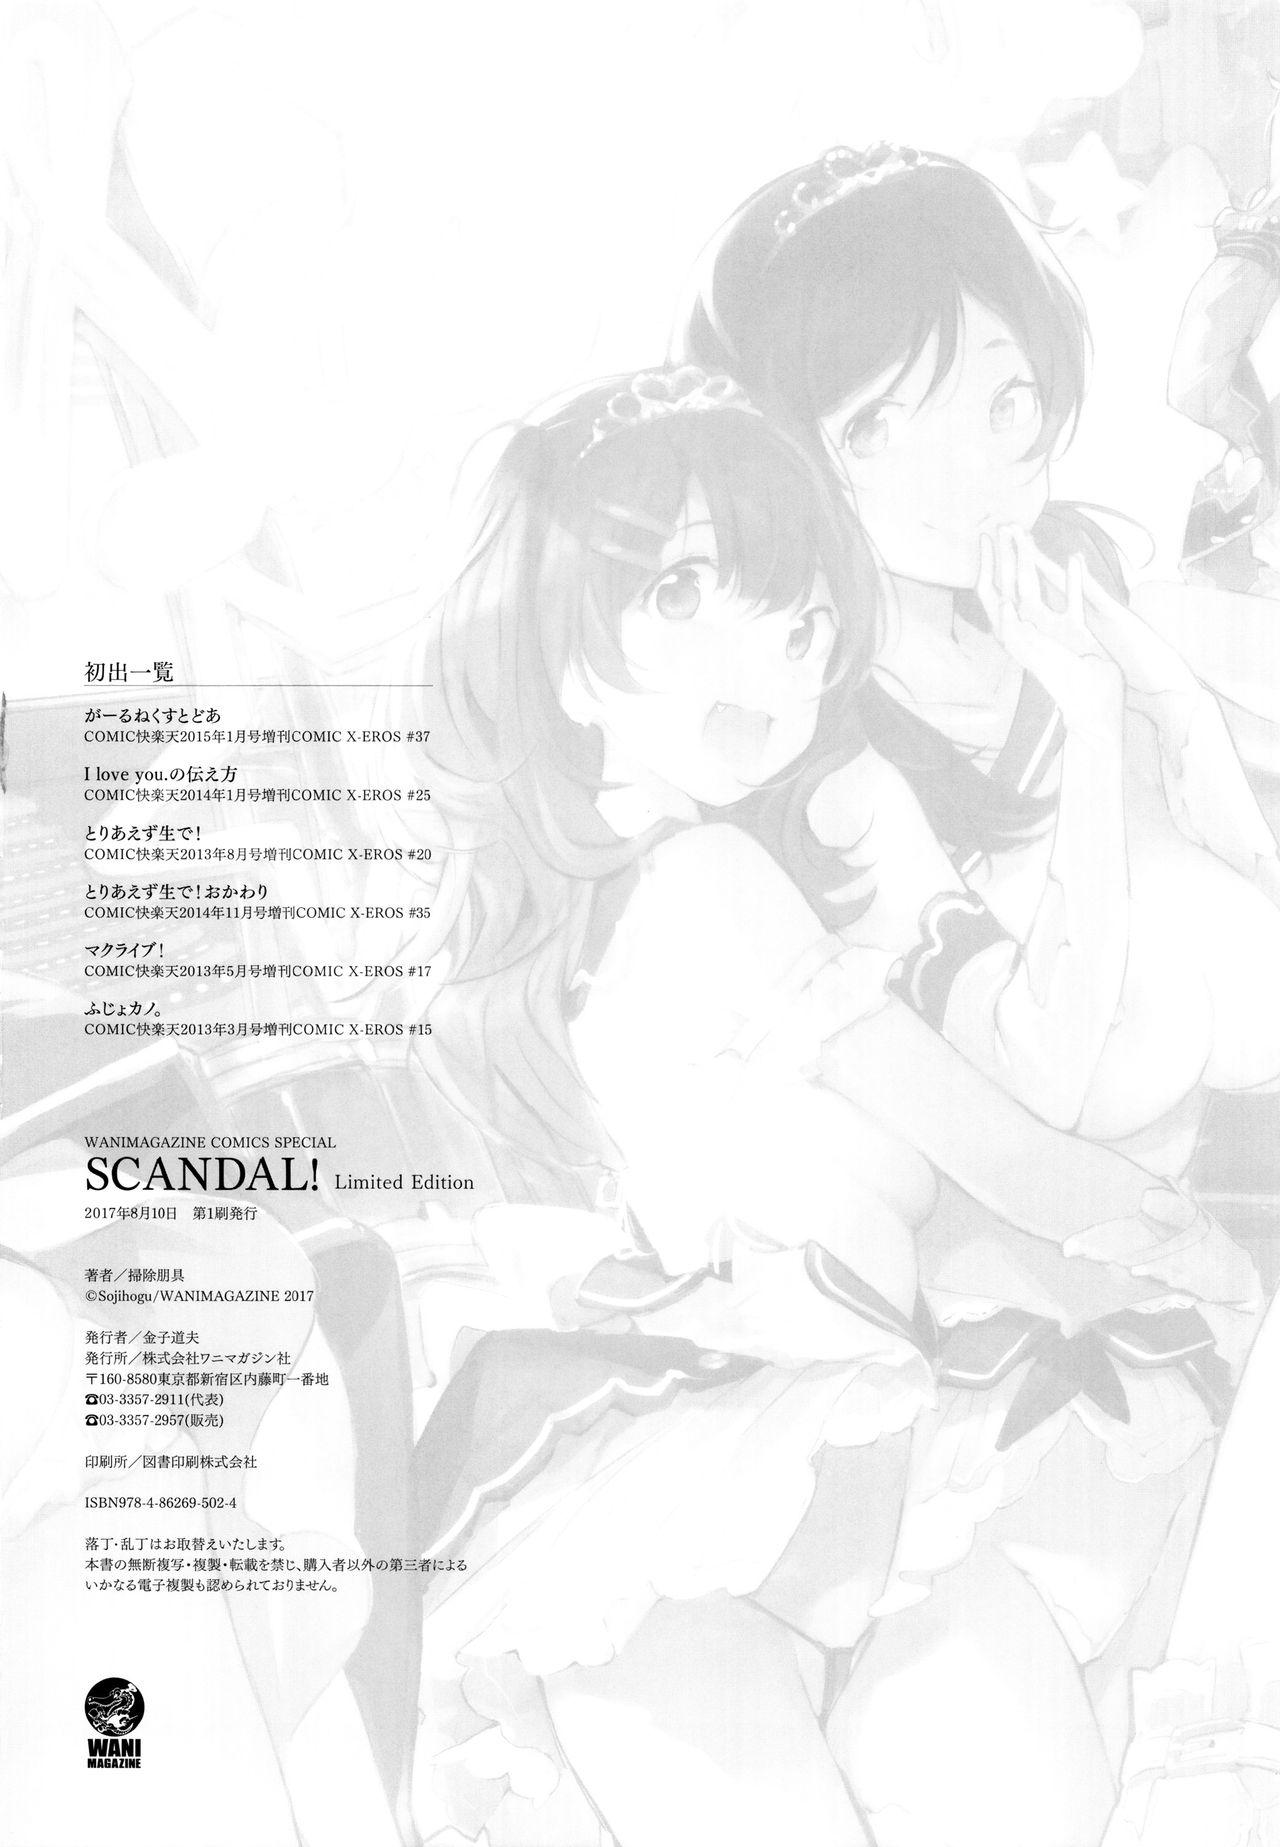 SCANDAL! Limited Edition 156